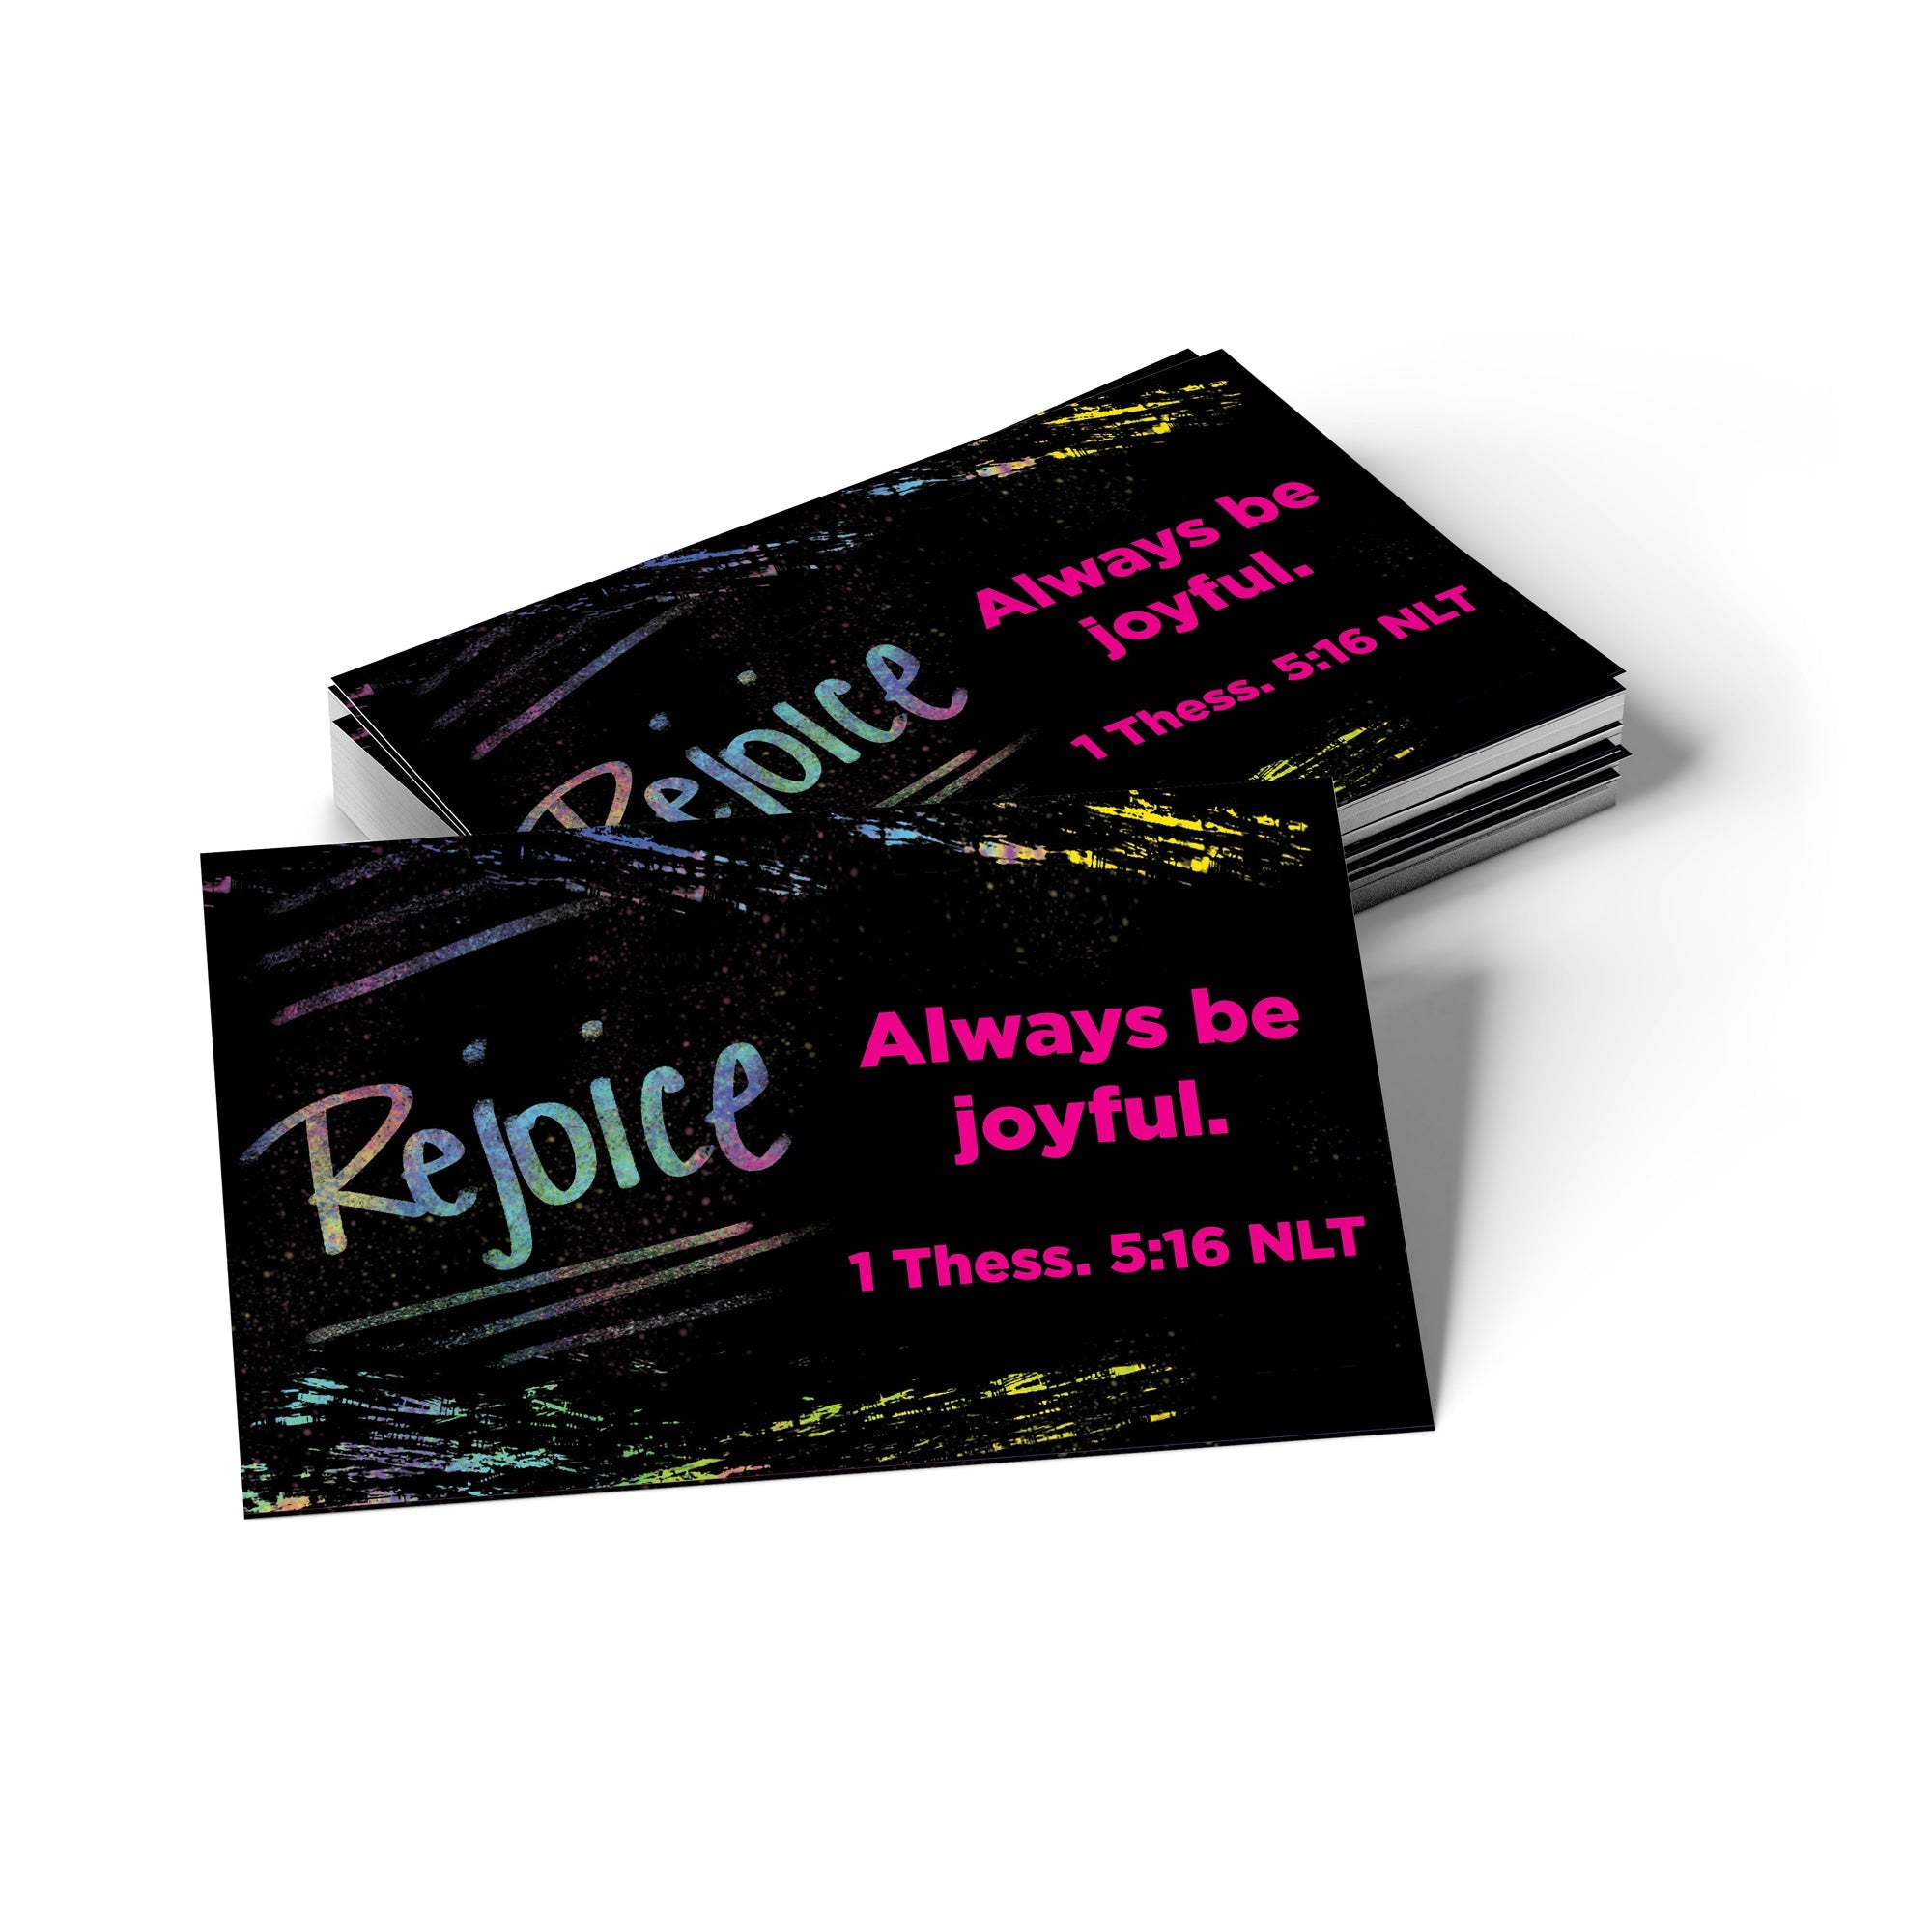 Children and Youth, Pass Along Scripture Cards, Rejoice, 1 Thessalonians 5:16, Pack of 25